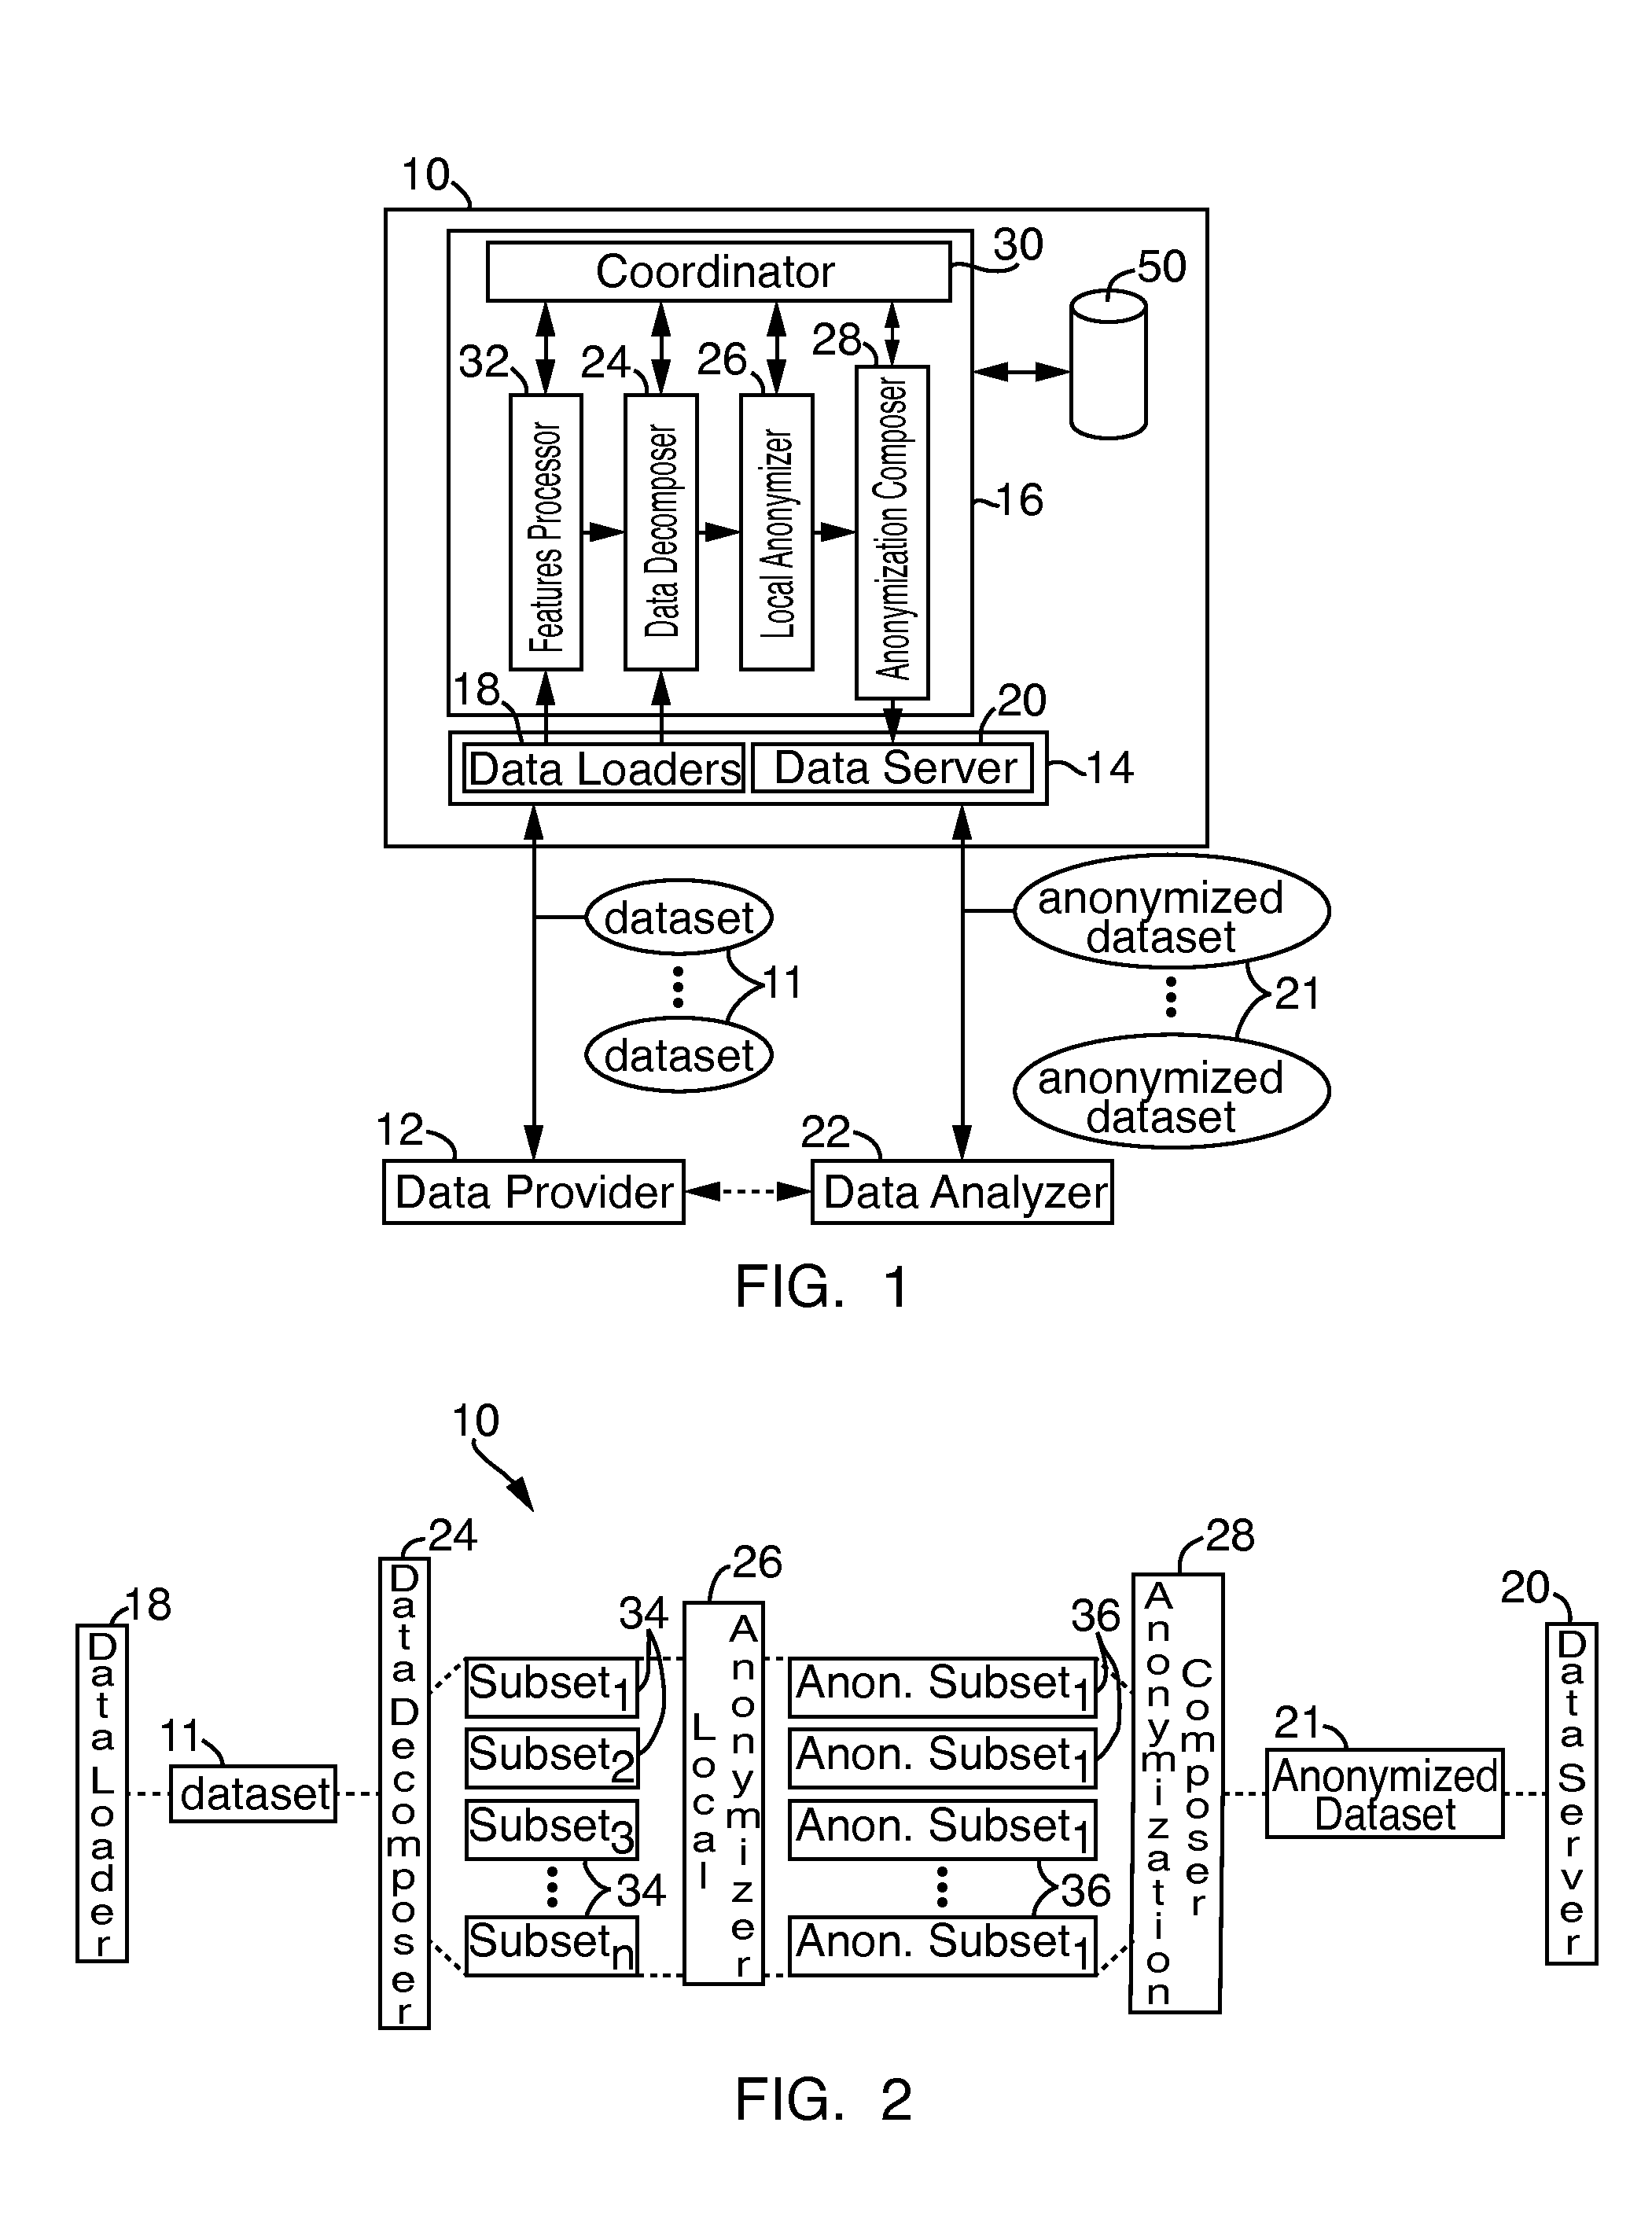 Systems and methods for data anonymization